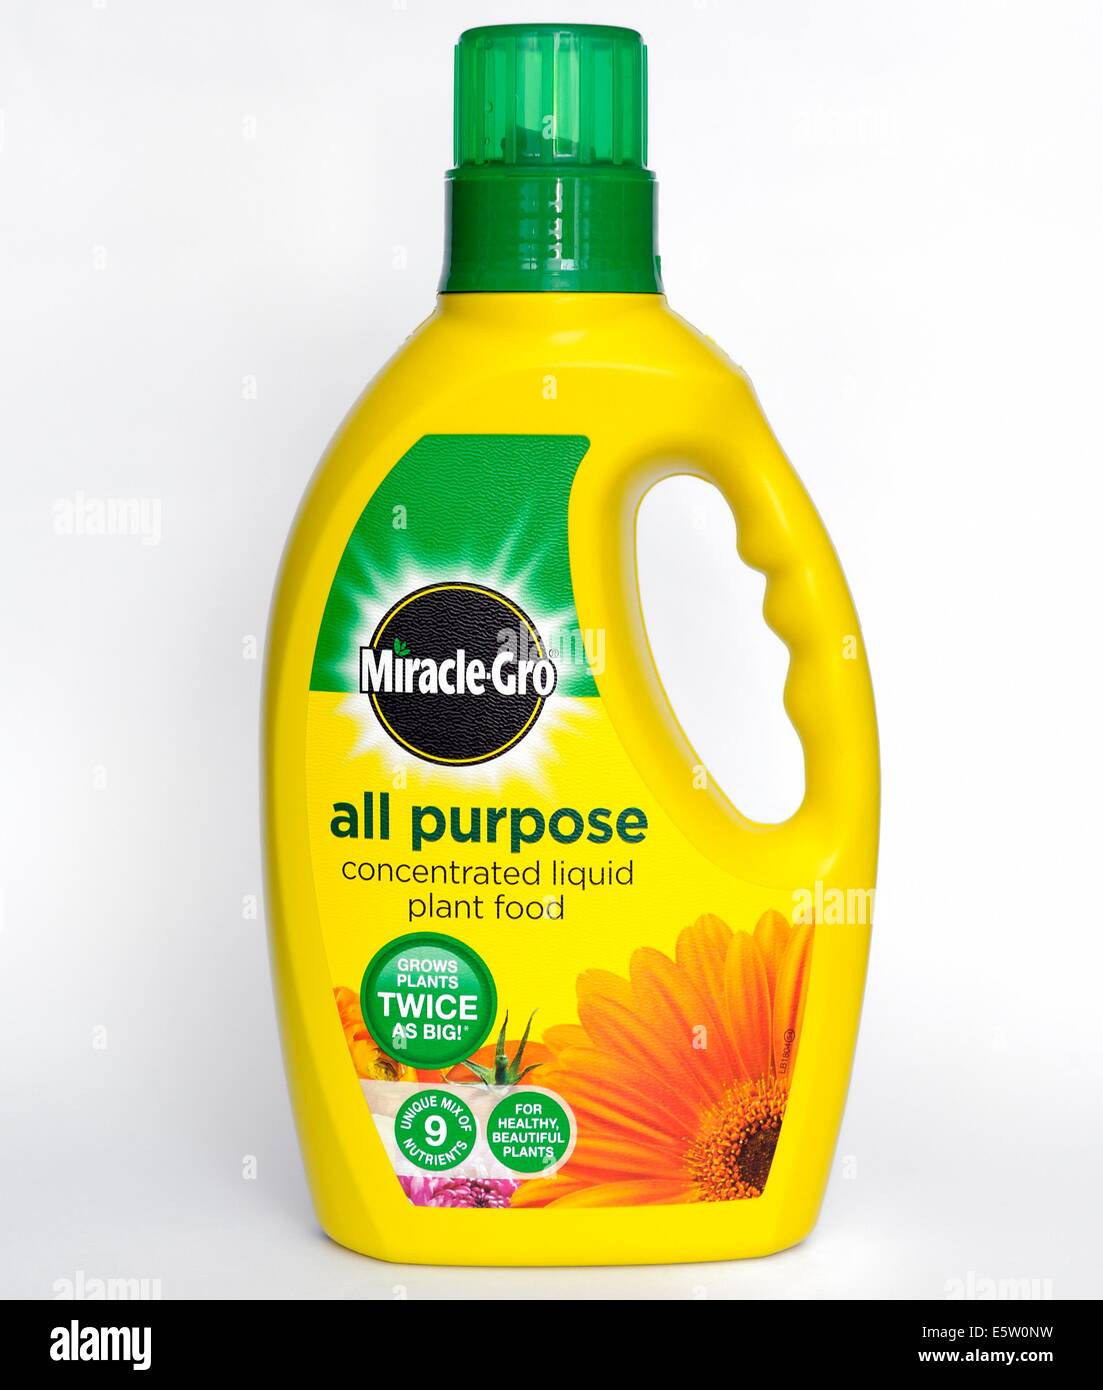 Miracle grow all purpose concentrated liquid plant food Stock Photo